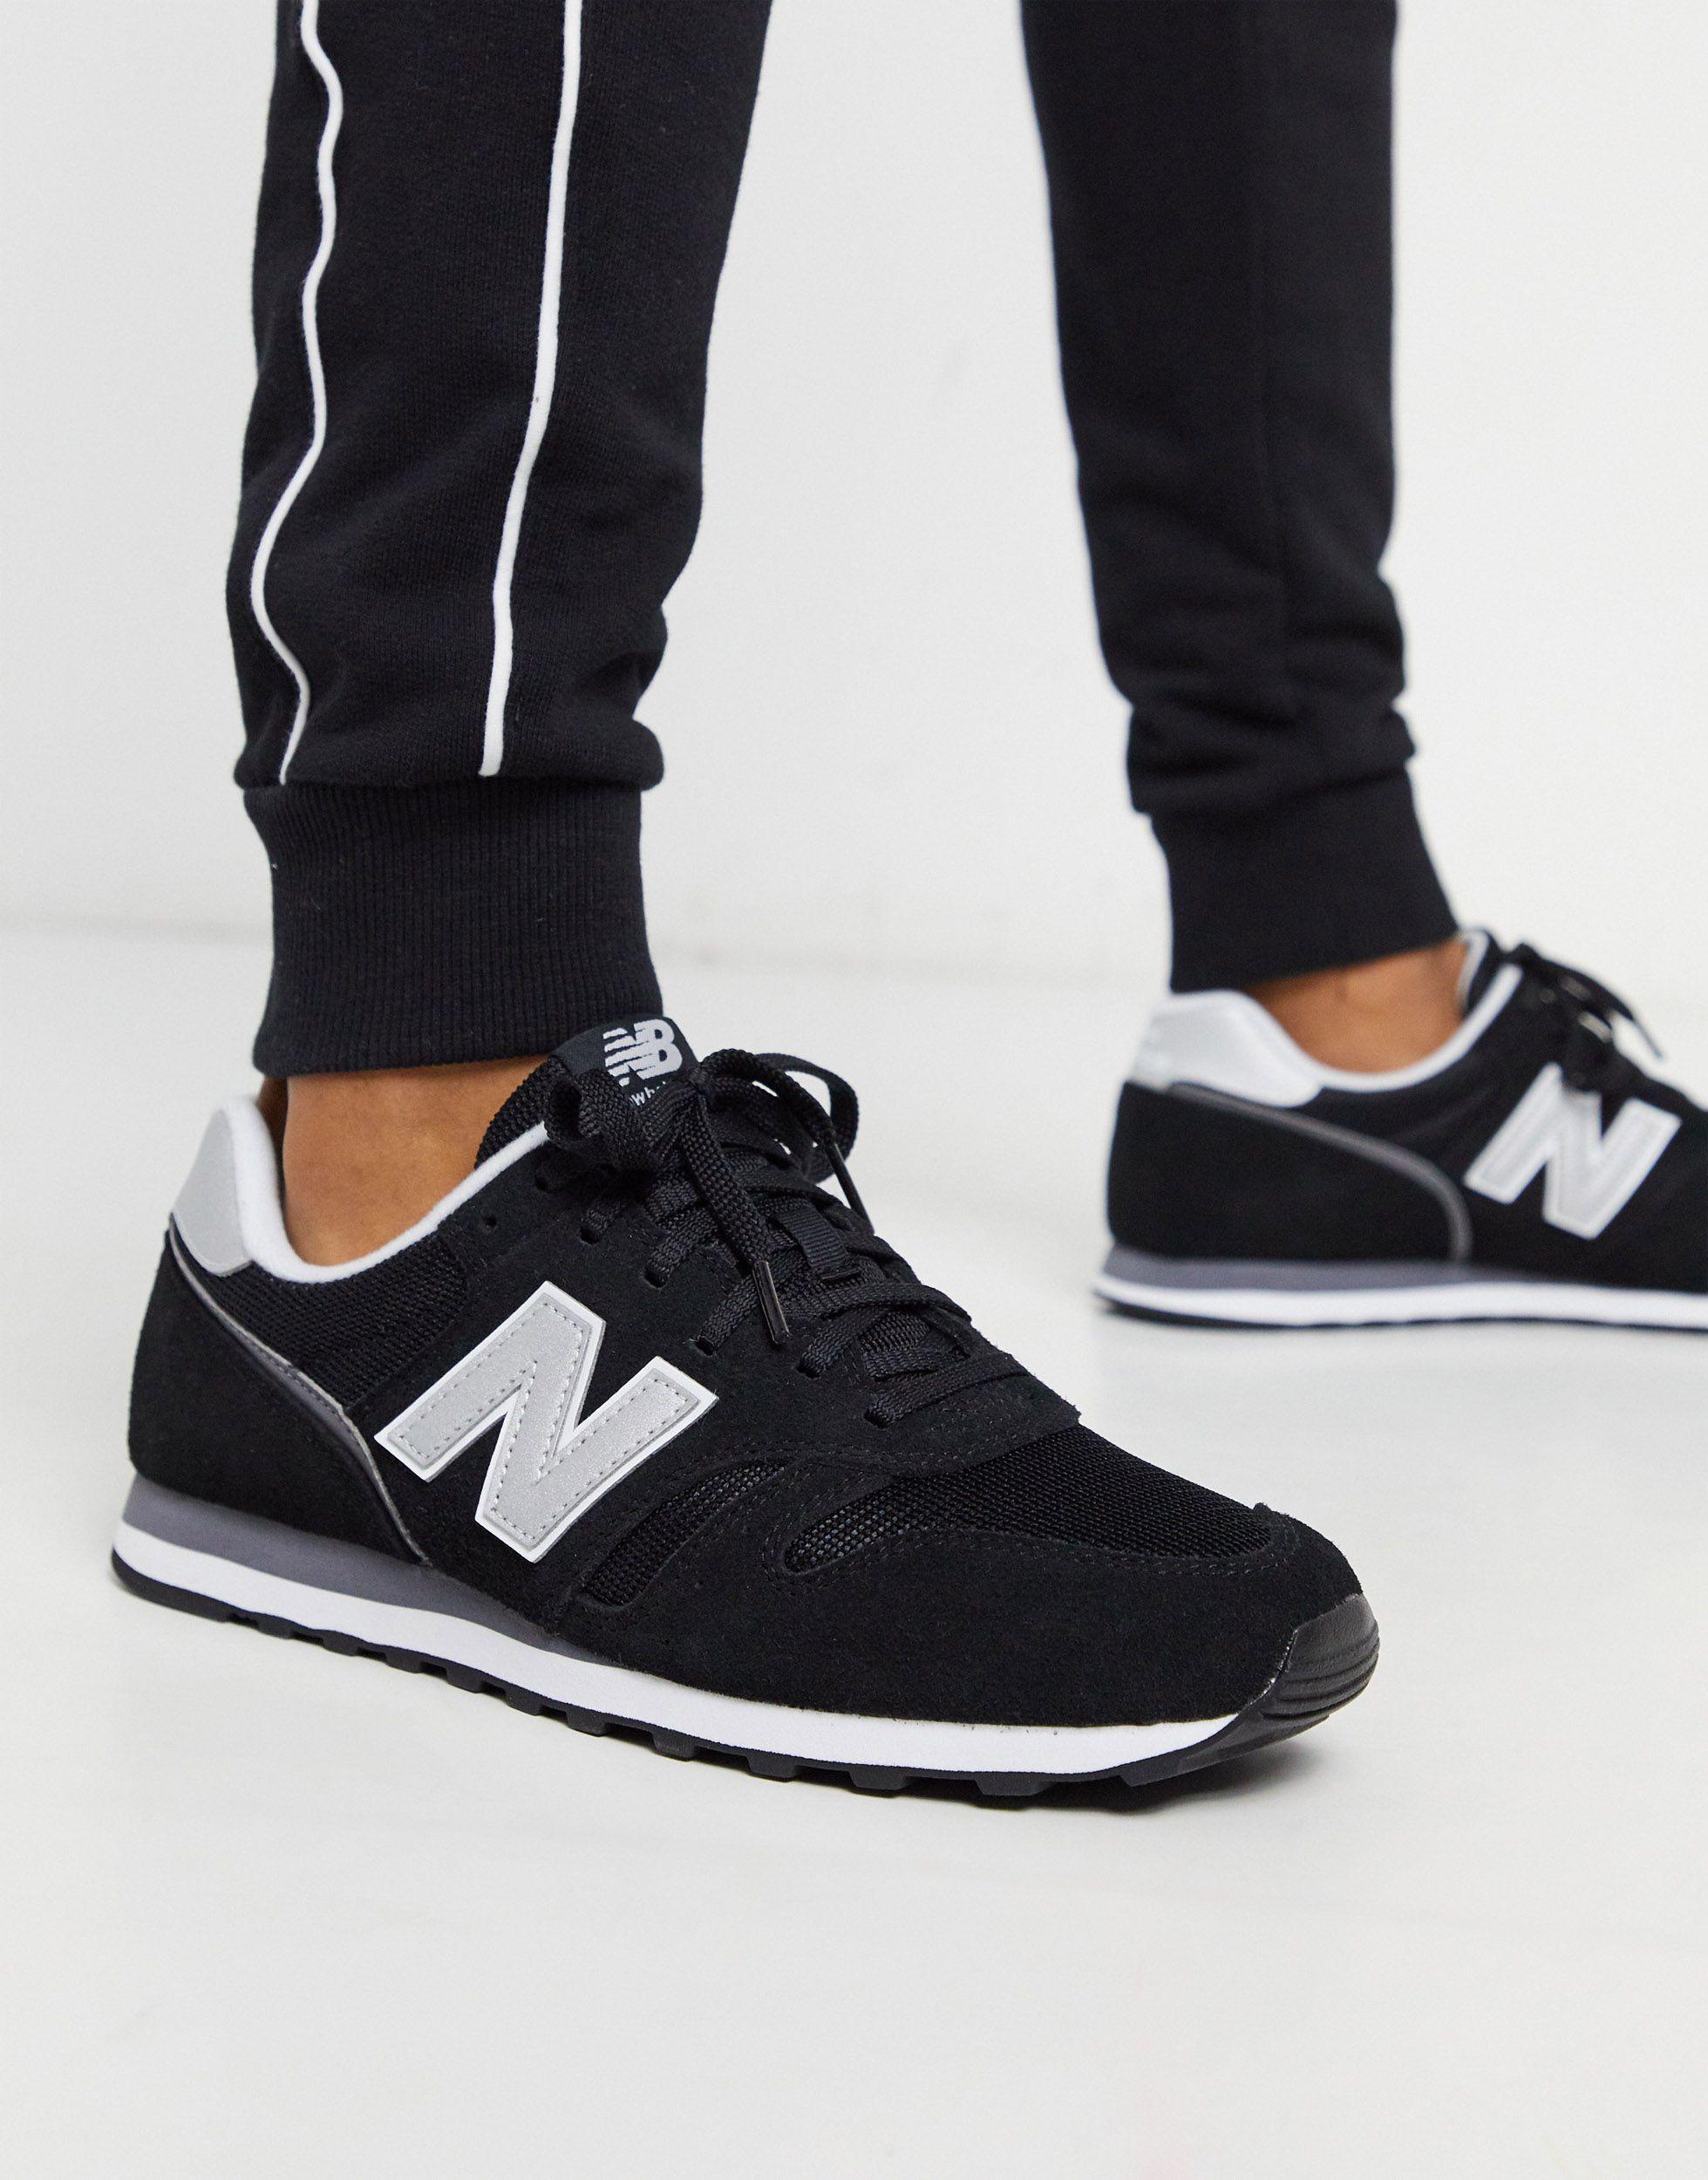 New Balance Leather 373 Sneakers in Black for Men - Lyst